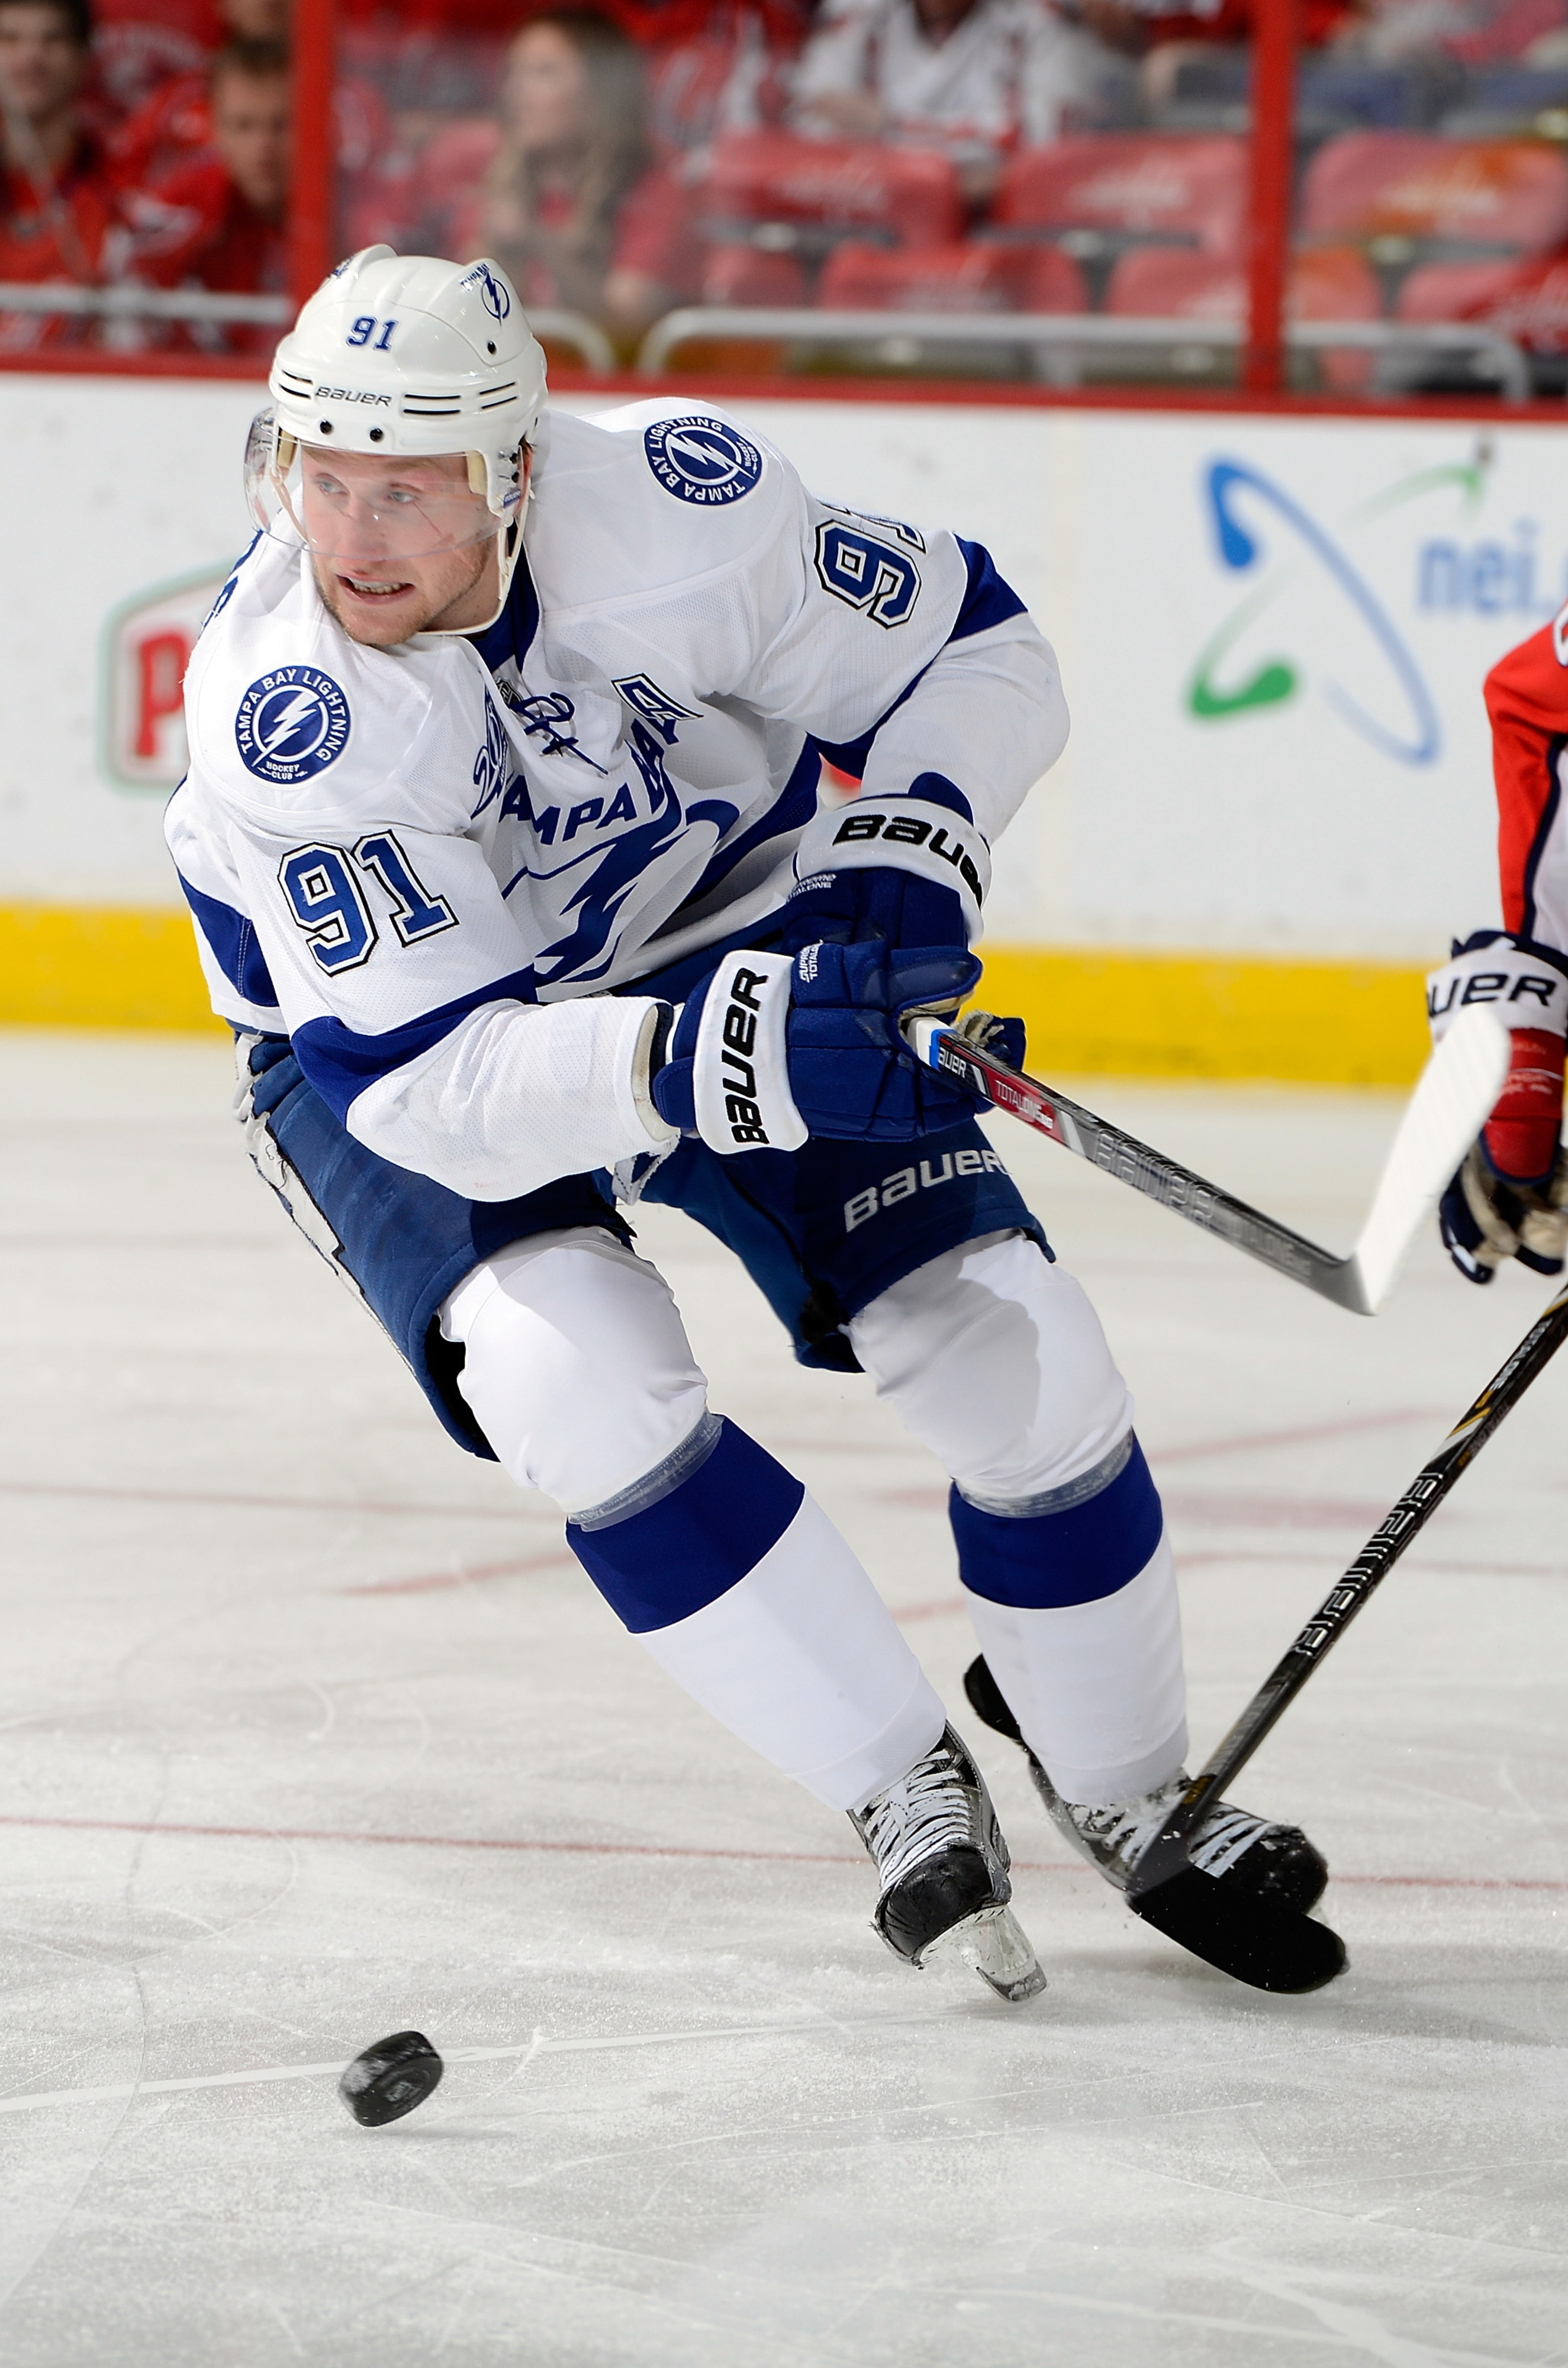 Stammer is still playing at the World Championship. But are you watching?